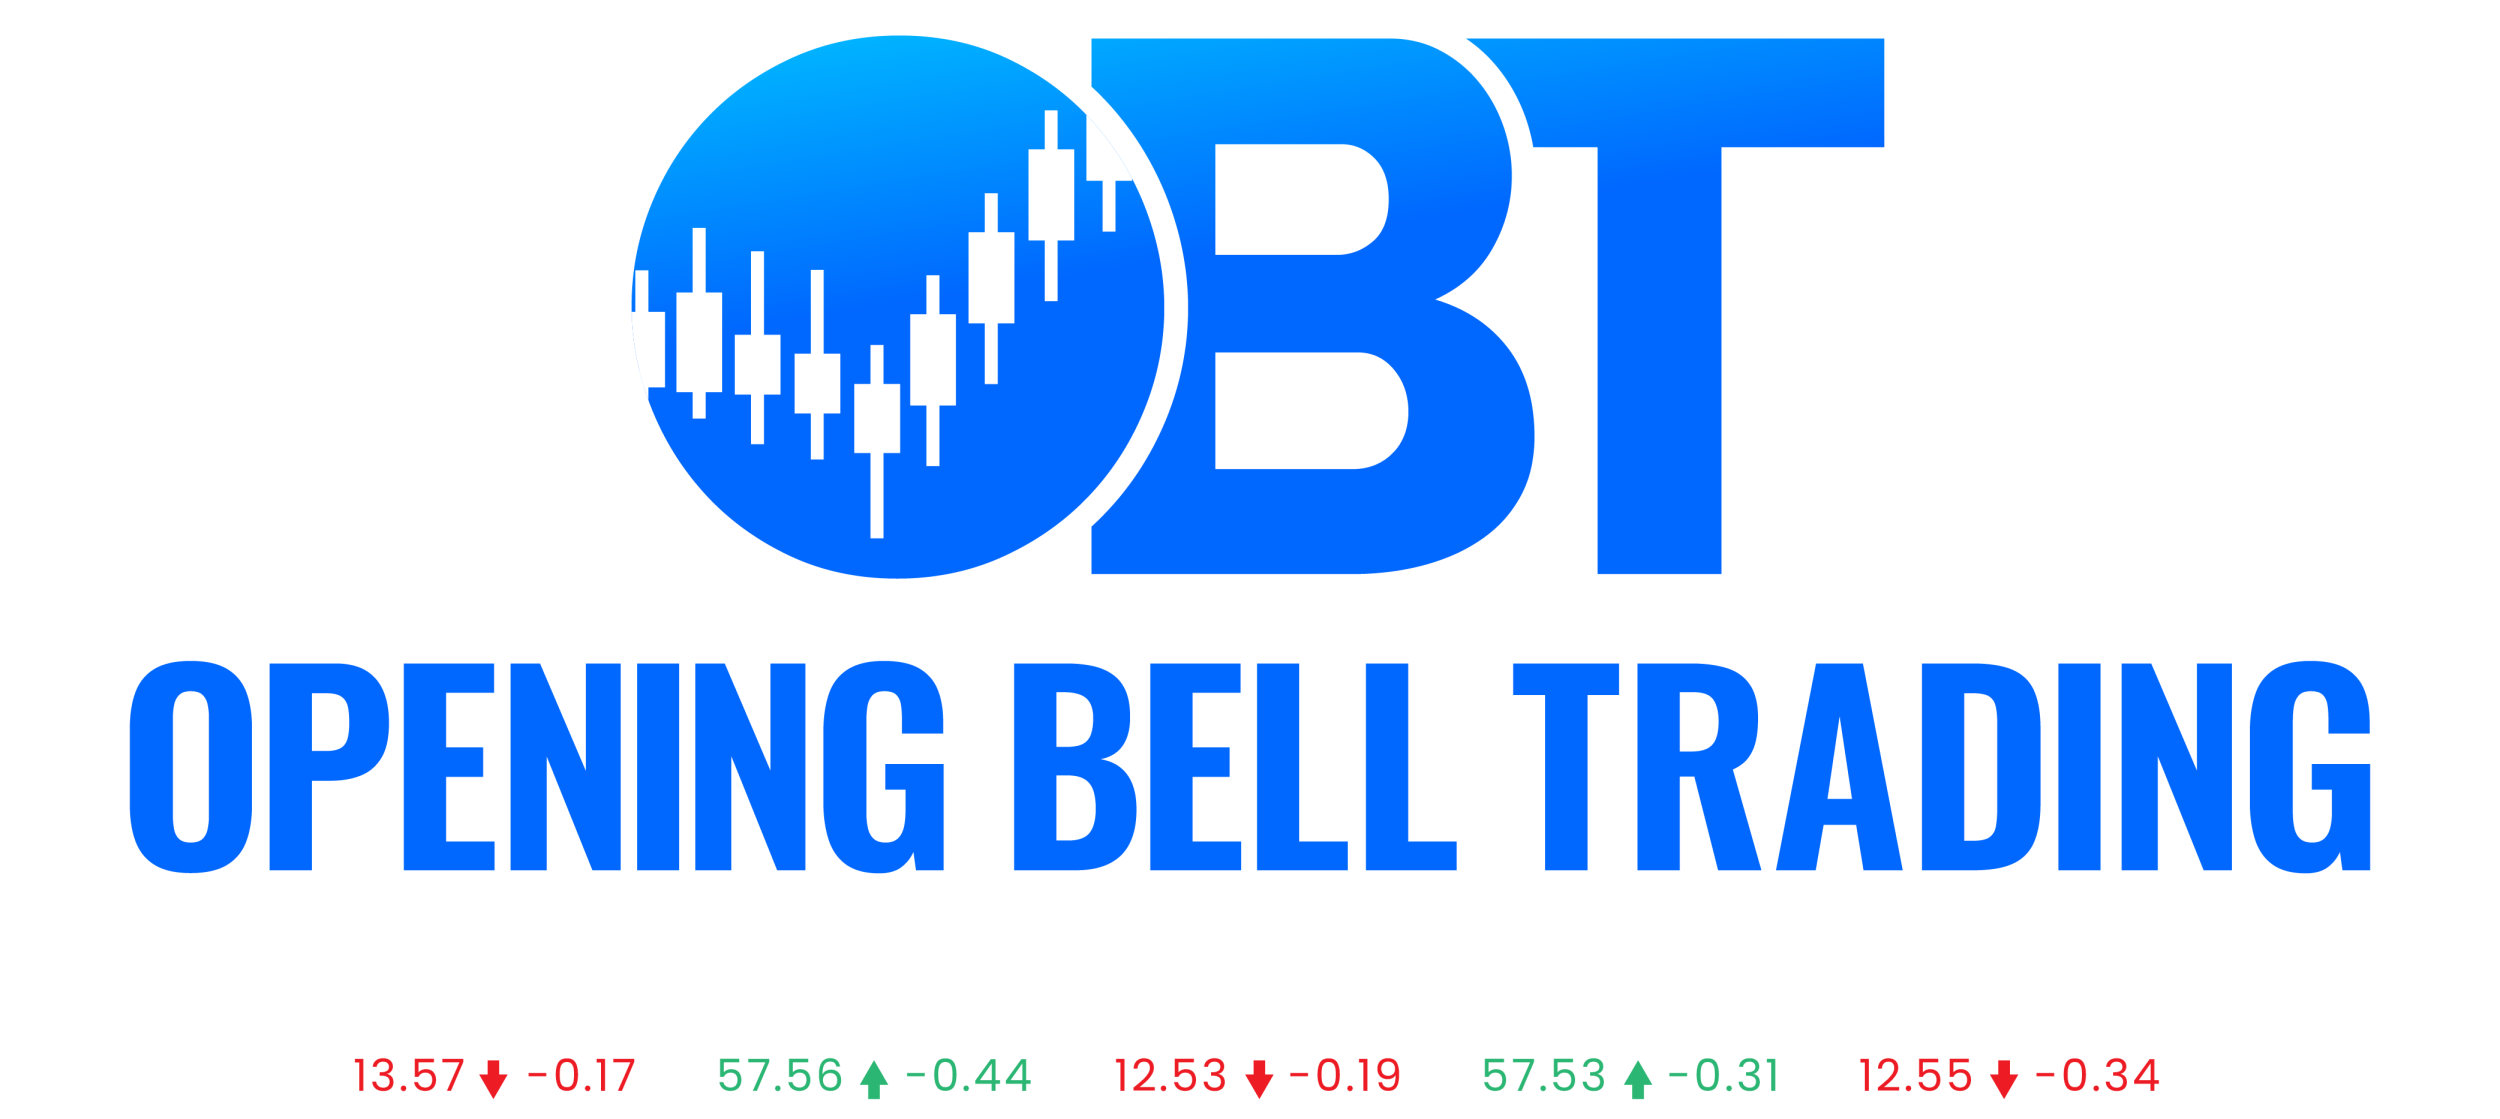 Opening Bell Trading